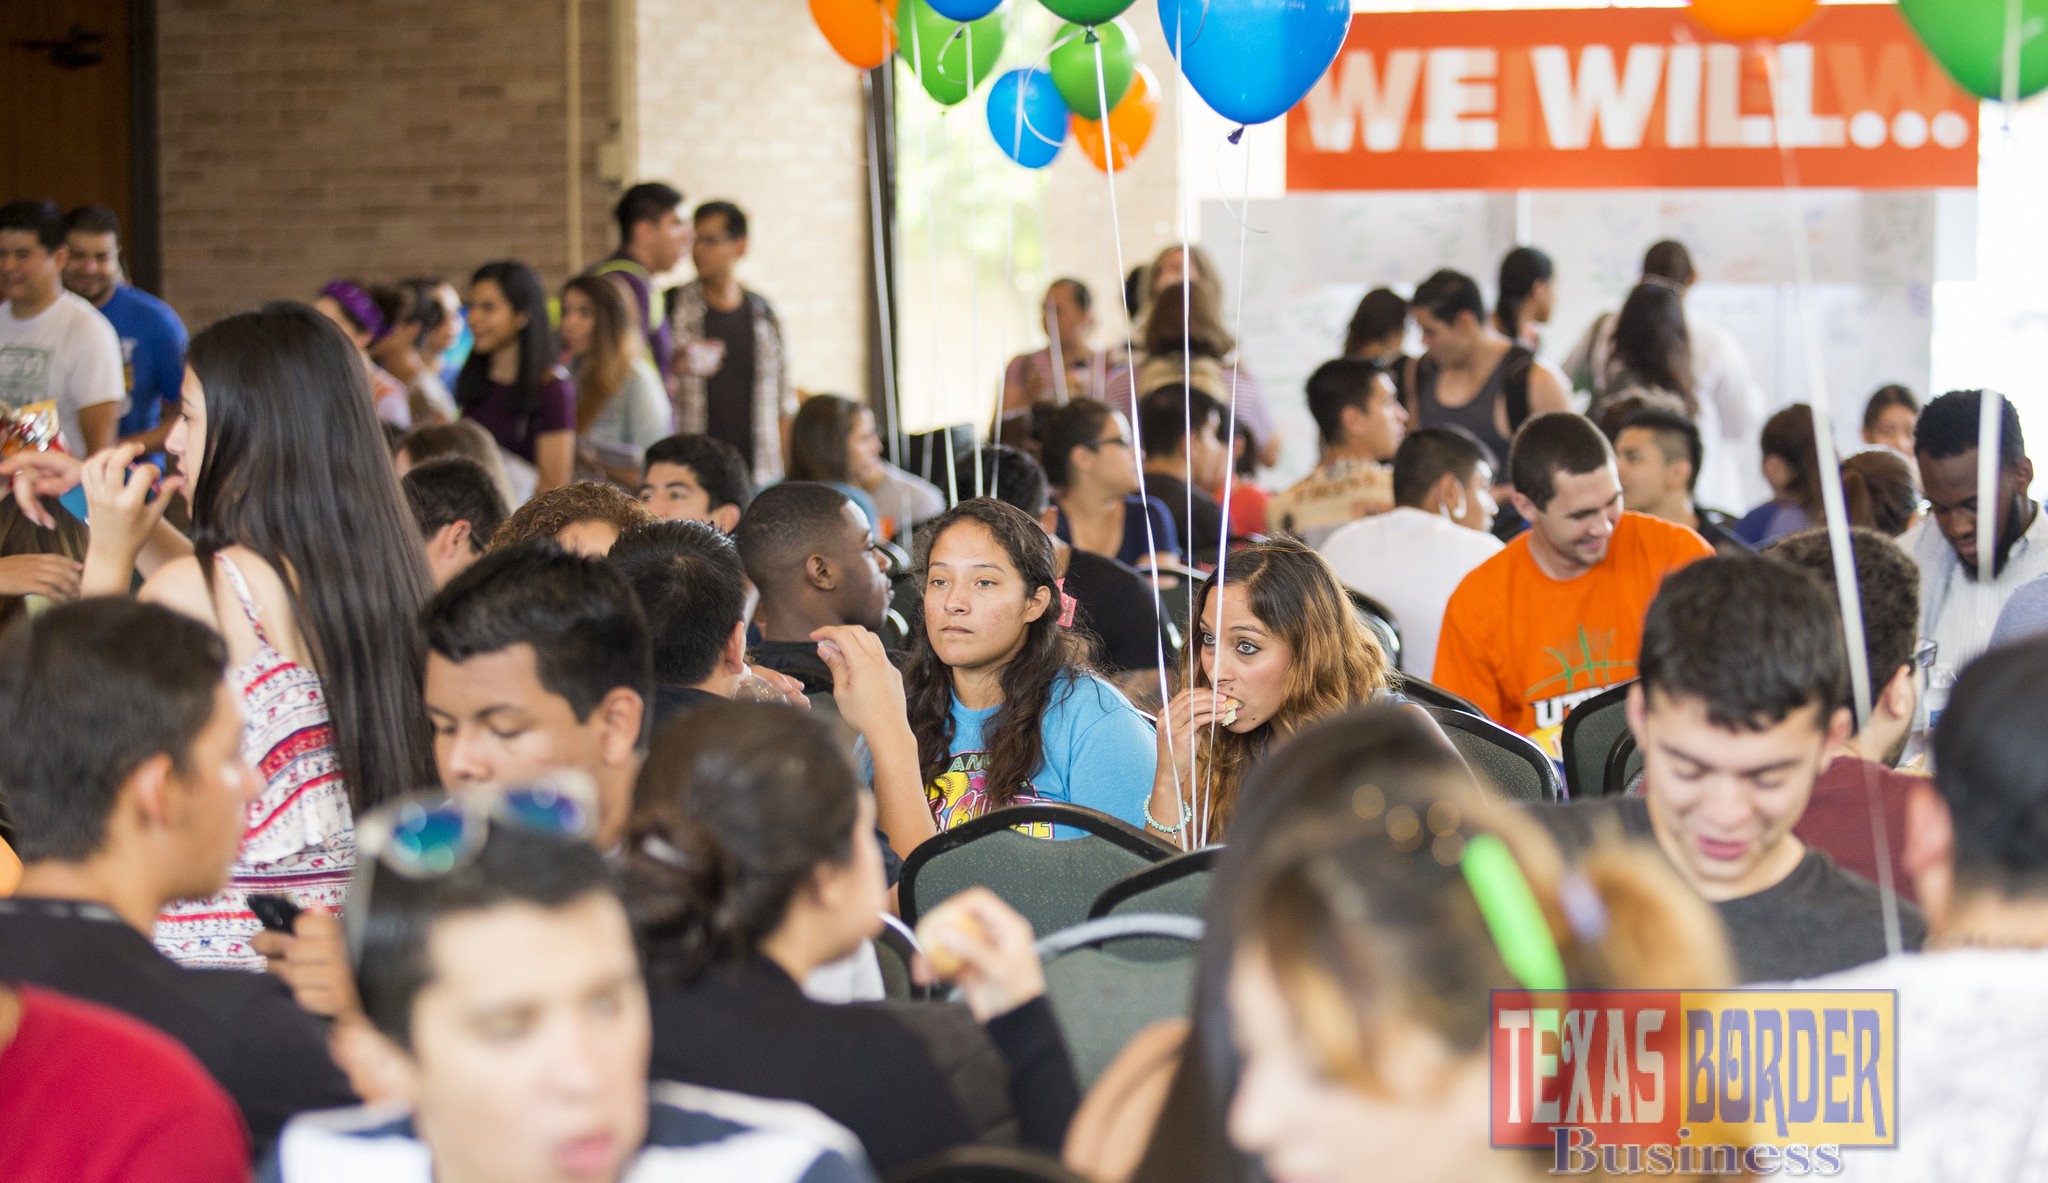 UTRGV students assembled for hotdogs and refreshments during Picnics with the President on the Edinburg and Brownsville campuses, a Best Week Ever event that helped celebrate the launch of The University of Texas Rio Grande Valley on August 31, 2015. (UTRGV Photo by David Pike)